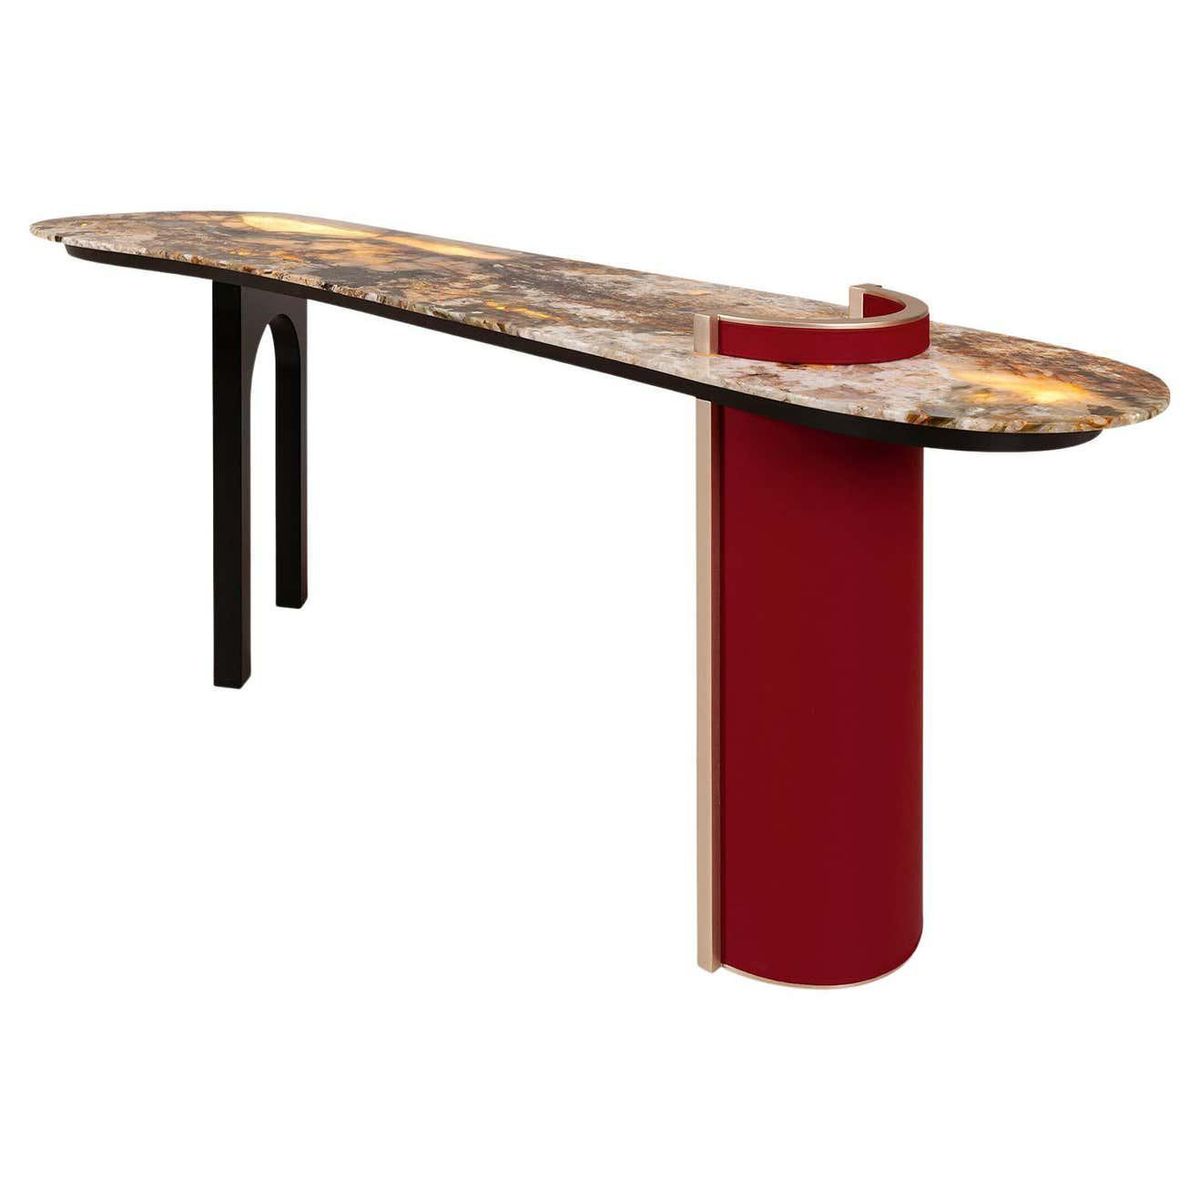 Chiado Console Backlit Patagonia Granite Red Leather Champagne Black Lacquered